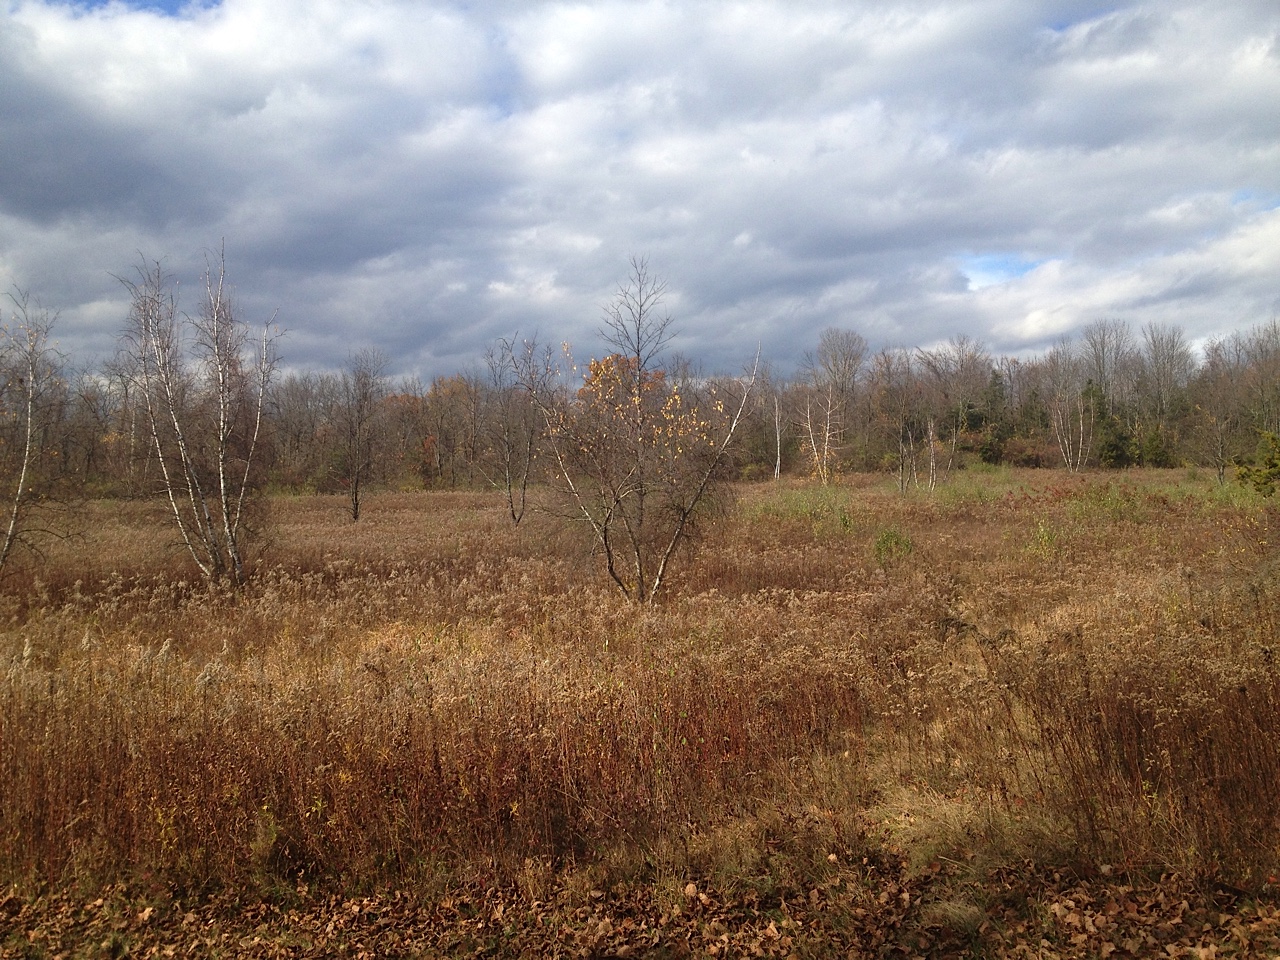 Native plant Garden: Late Fall Meadow With Gray Birch